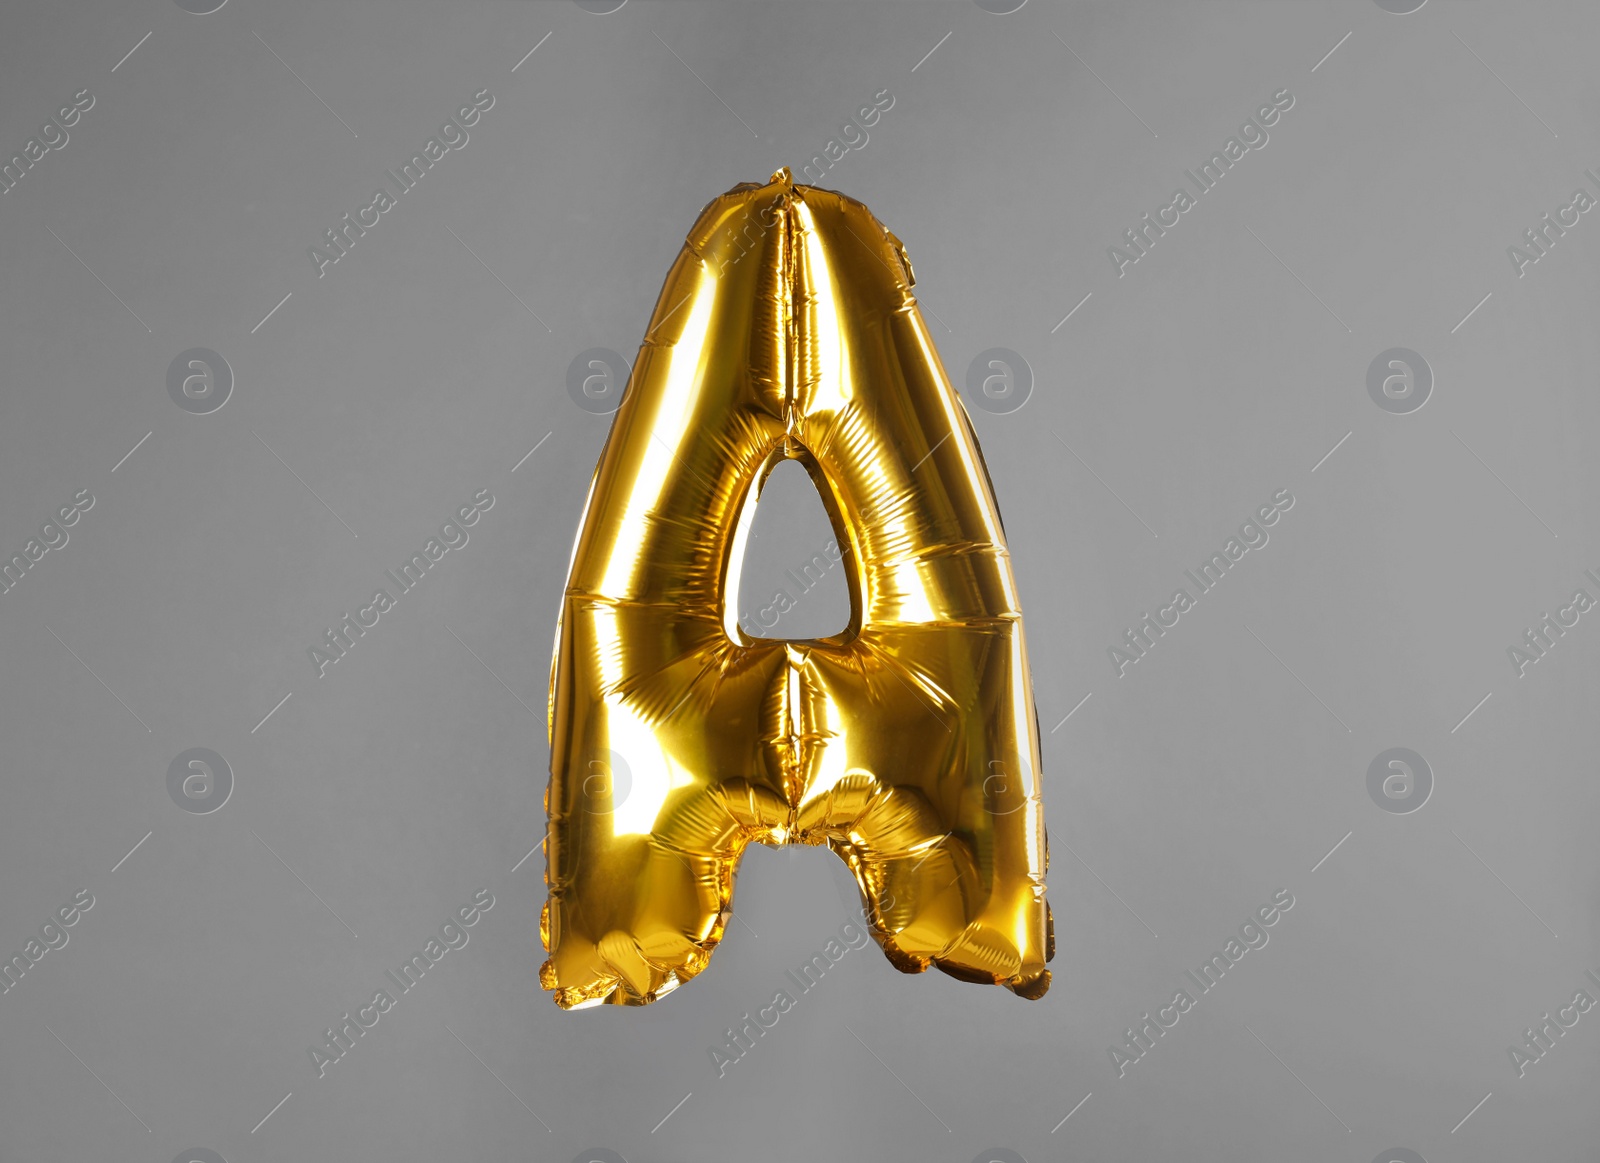 Photo of Golden letter A balloon on grey background